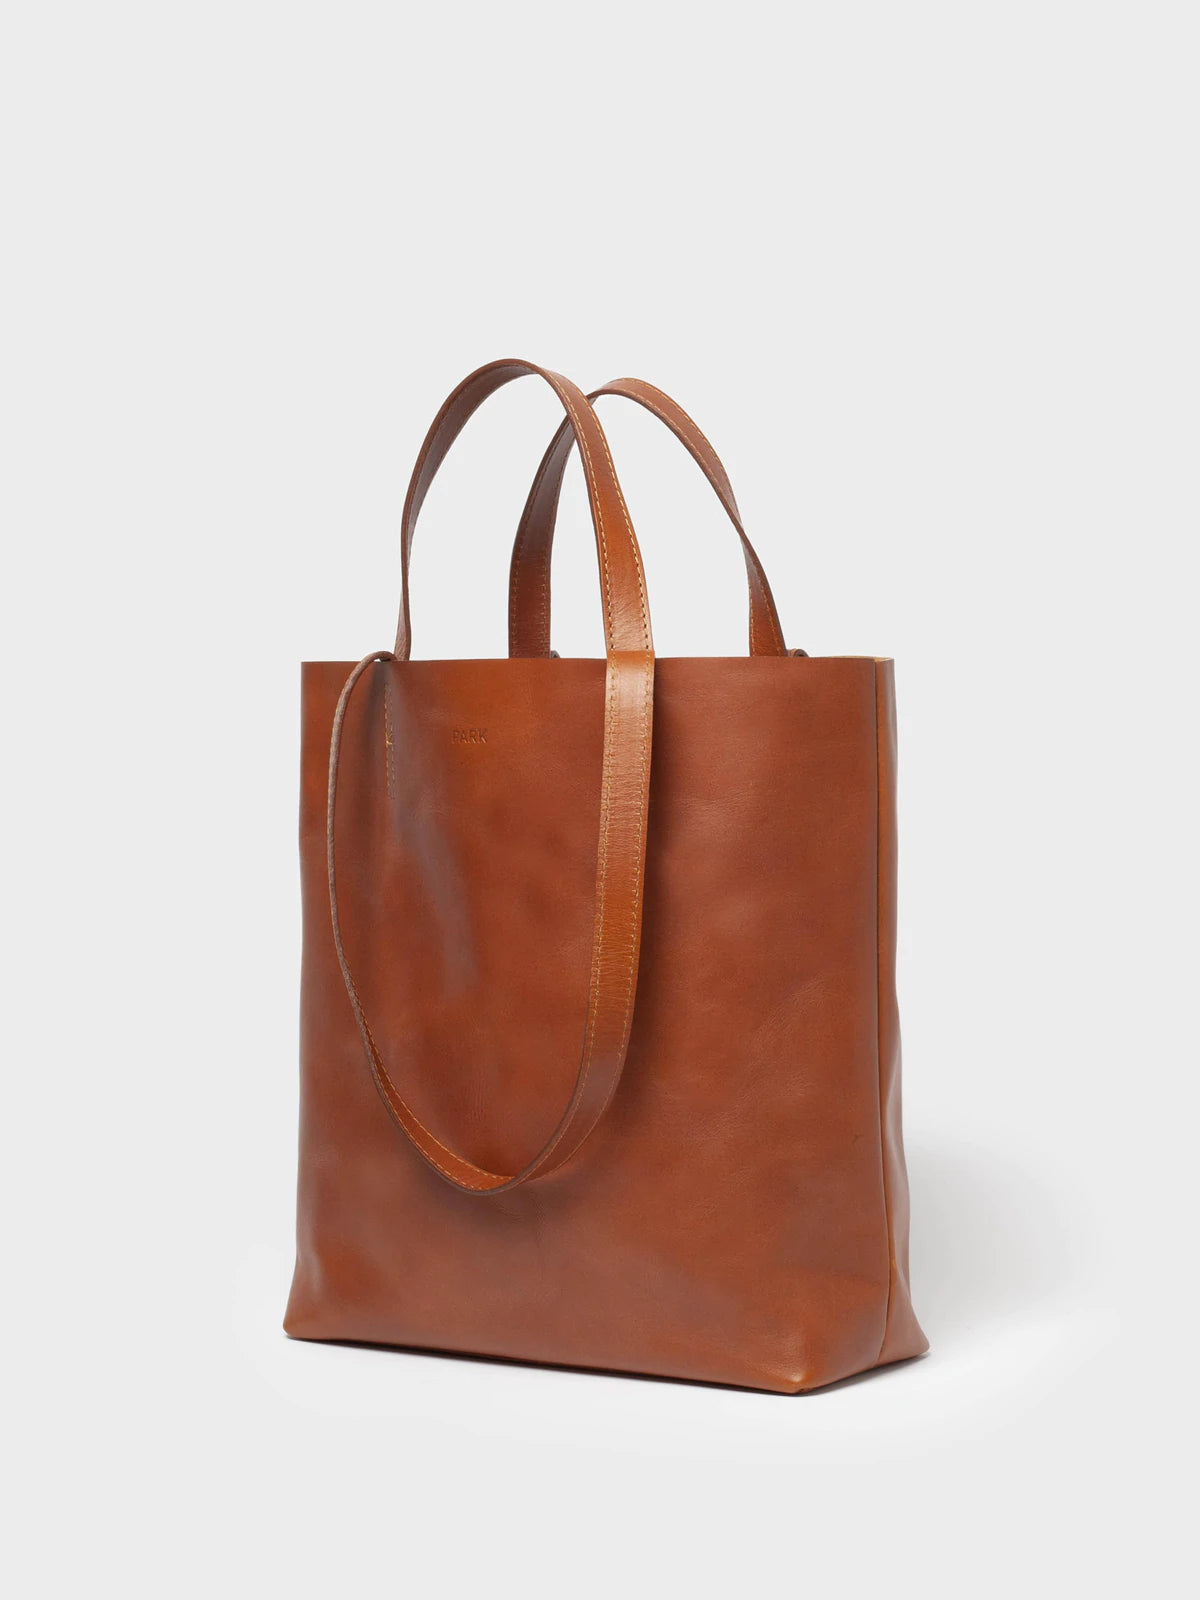 TB08 TOTE BAG WITH 4 STRAPS - BROWN